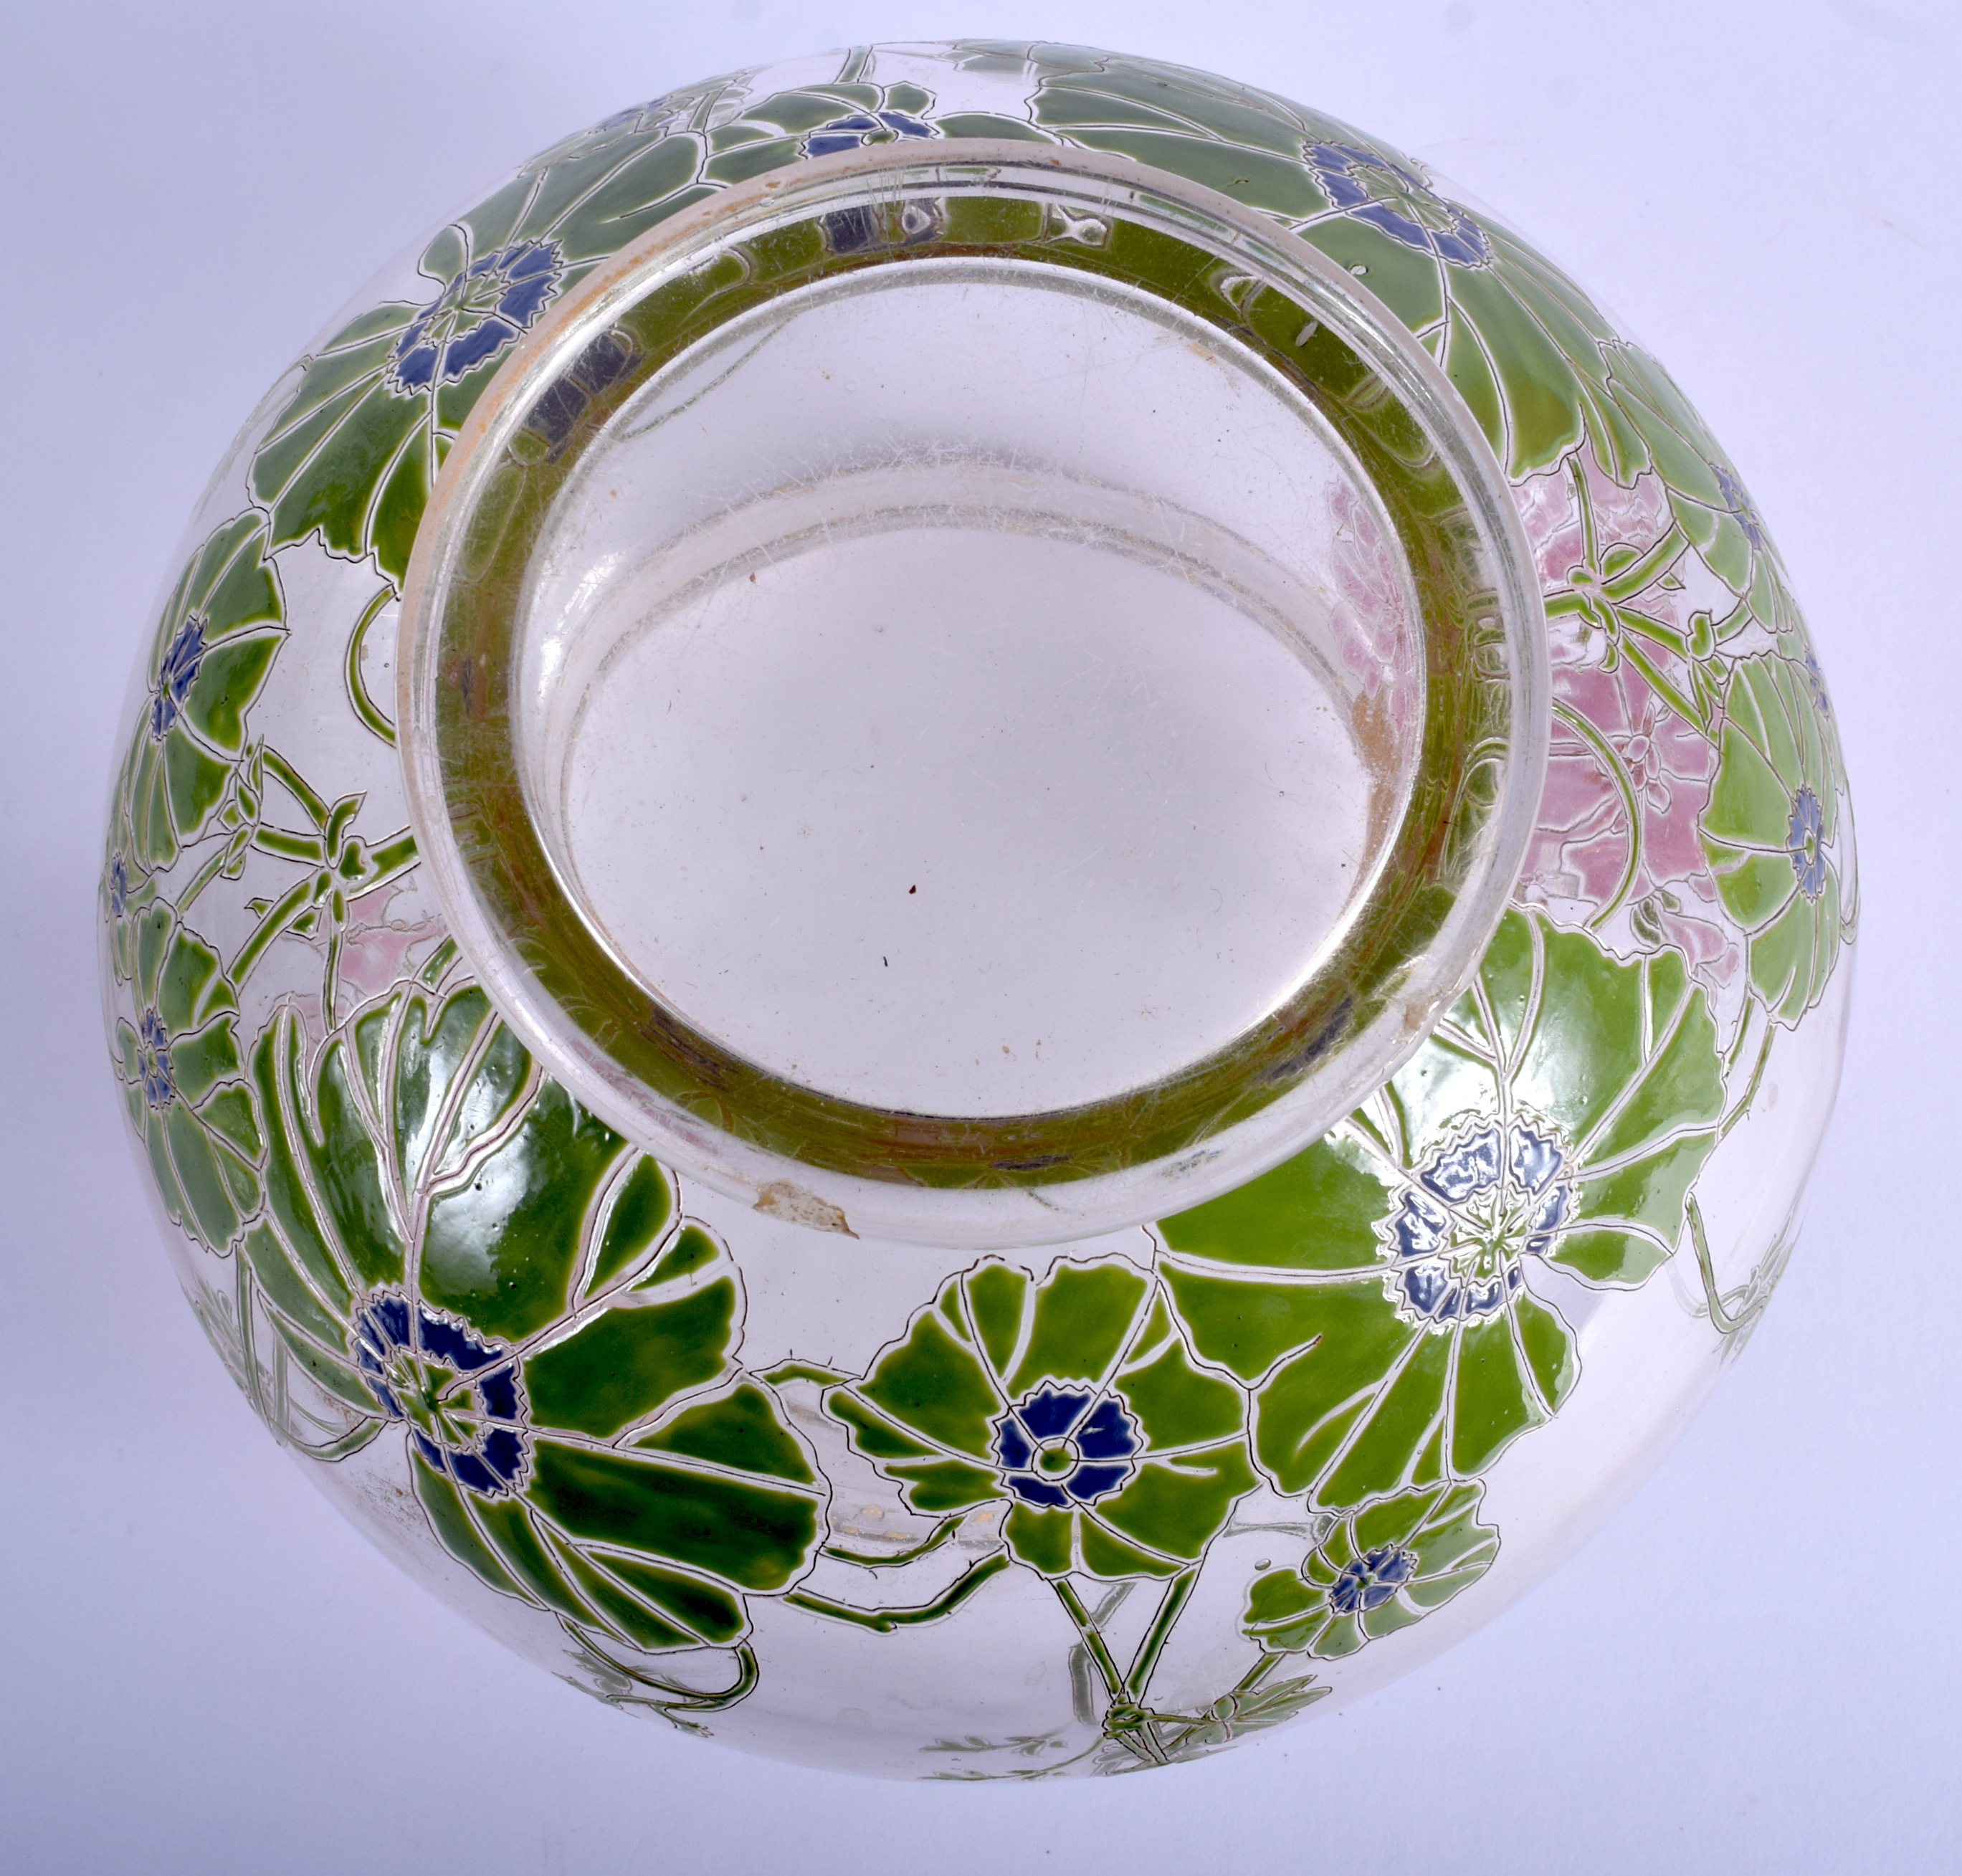 AN ART NOUVEAU ENAMELLED GLASS VASE painted with foliage and bees. 18 cm x 16 cm. - Image 3 of 3